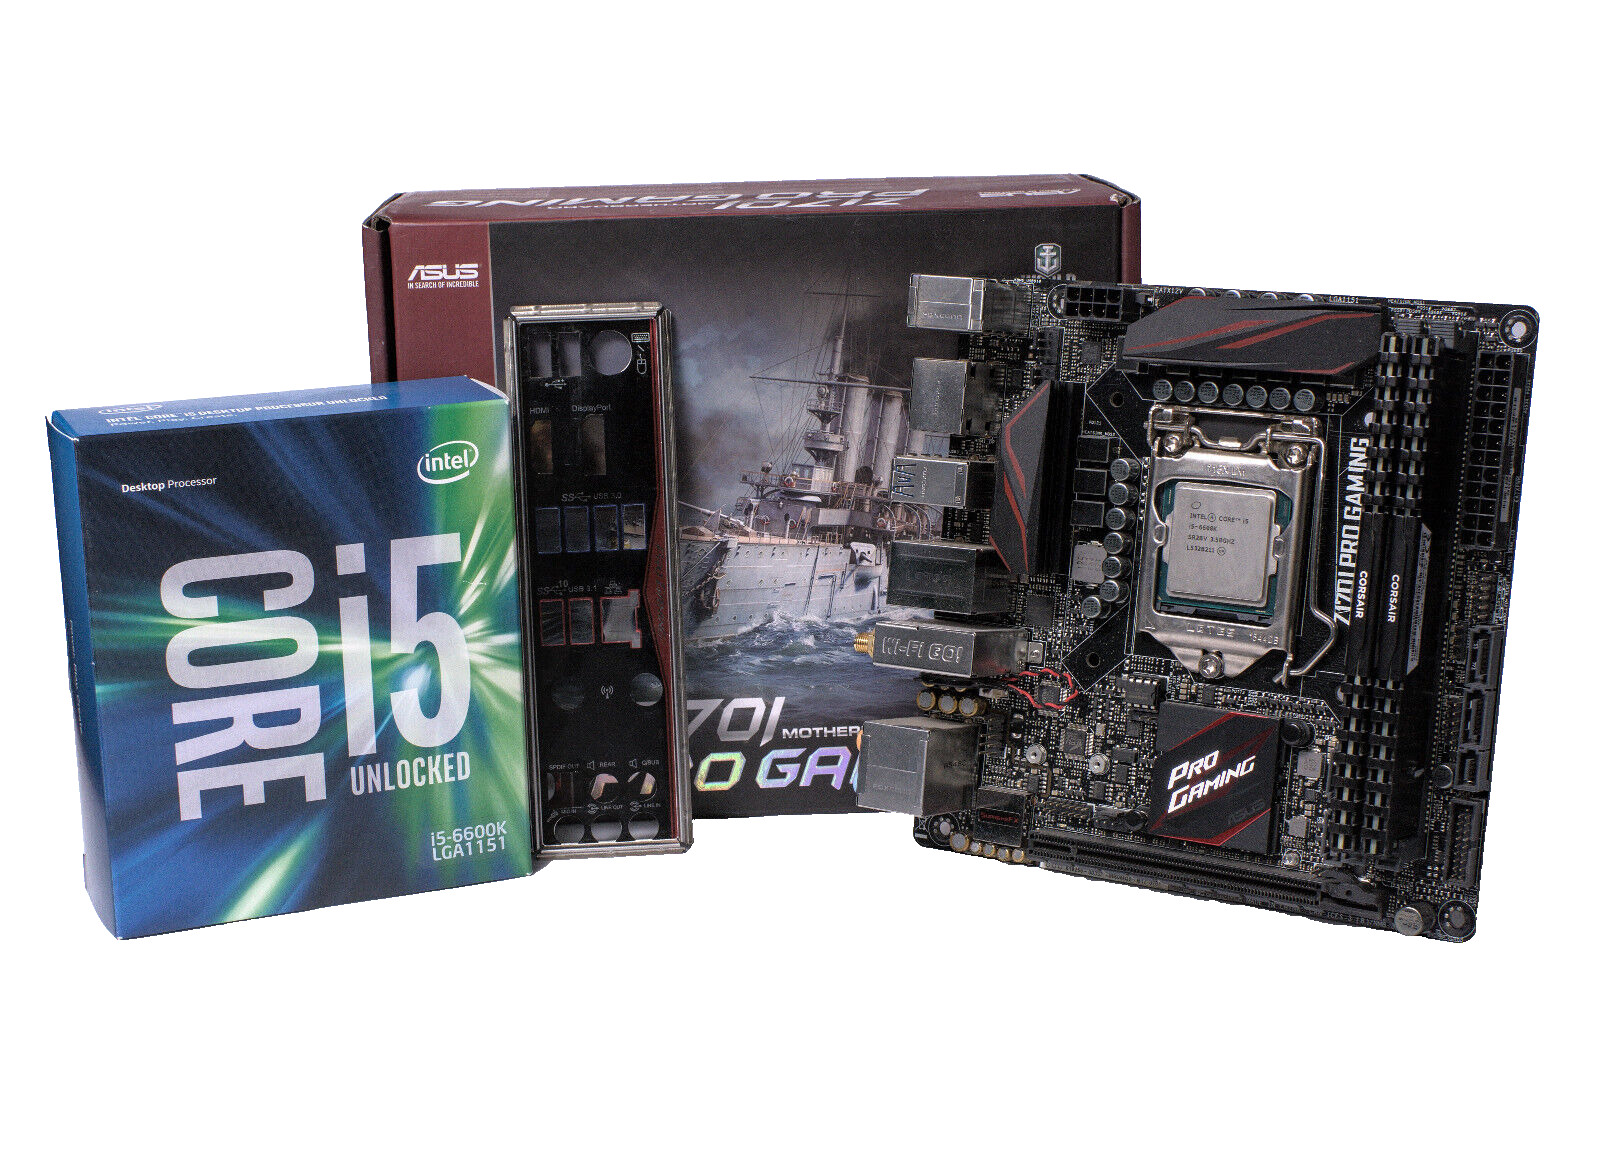 ASUS Z170I Pro Gaming Motherboard With CPU, i5 6600K DDR4 Intel Mini ITX